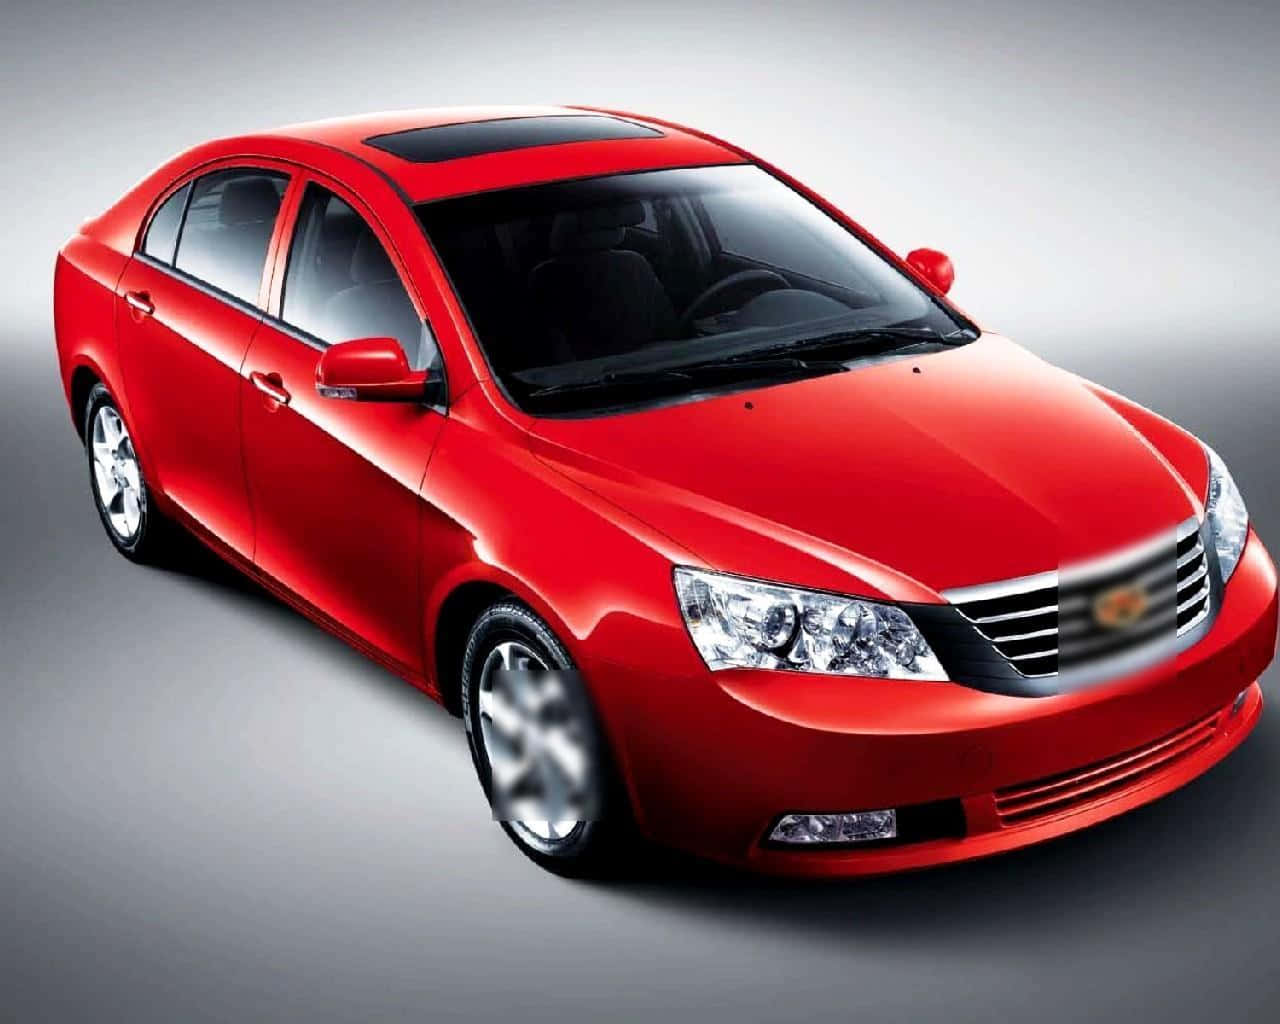 Sleek Geely car on a scenic road Wallpaper